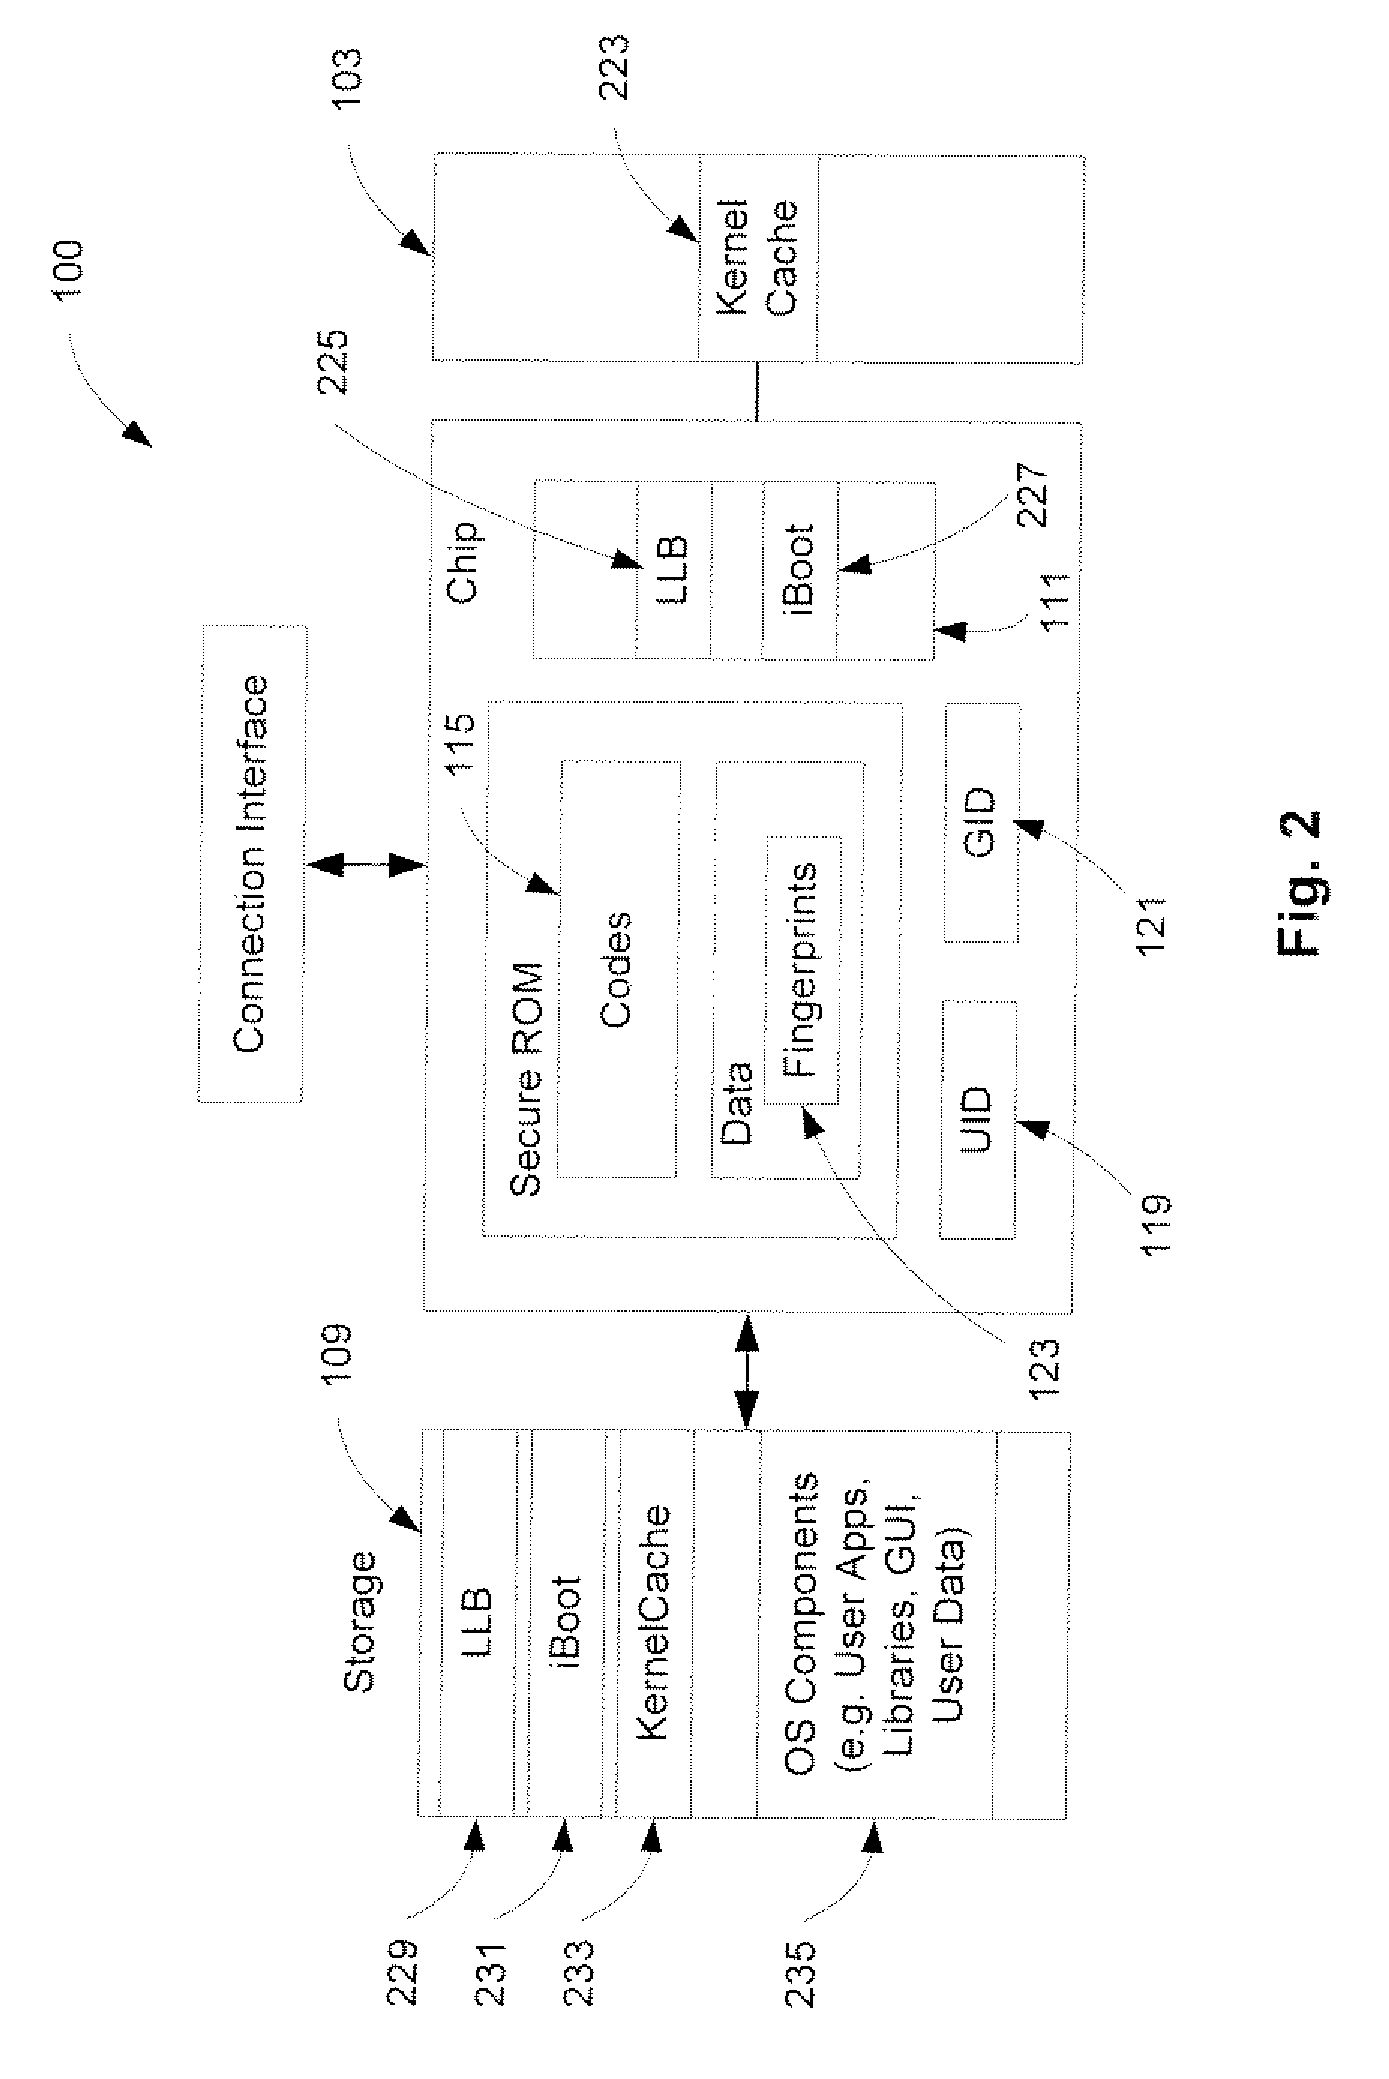 Secure Booting A Computing Device